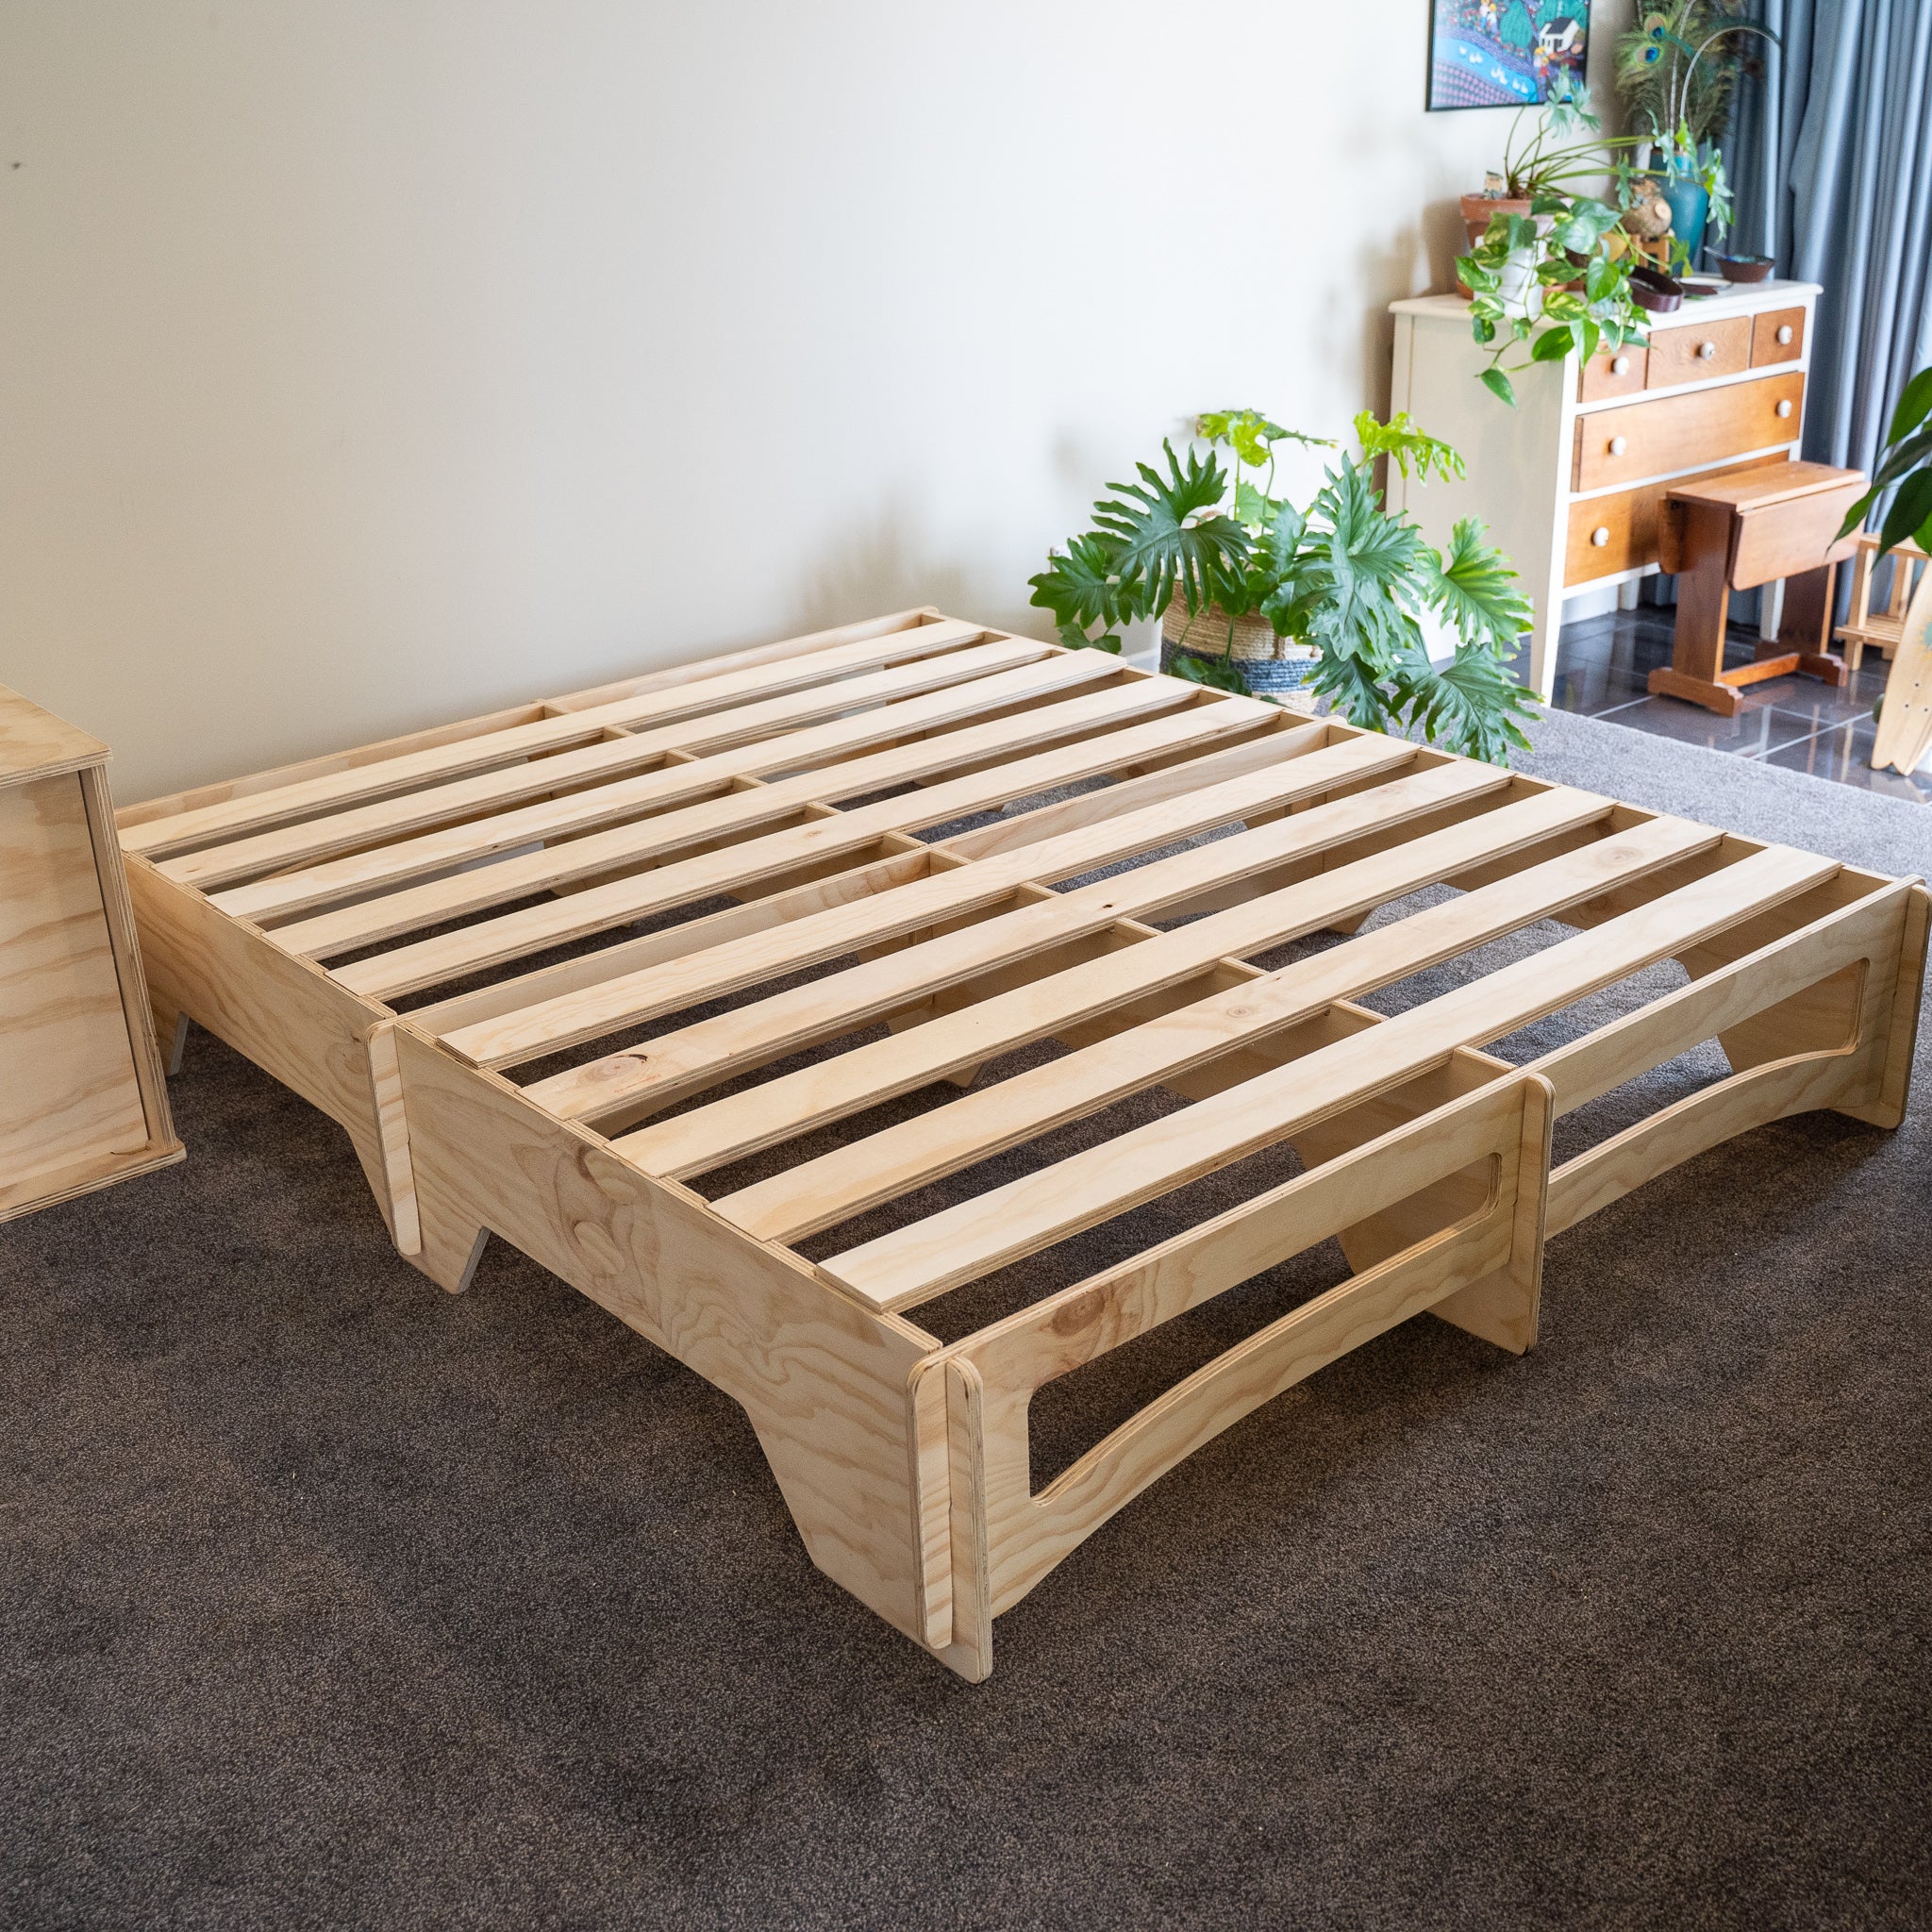 The Slat Bed Good Wood Products Nz